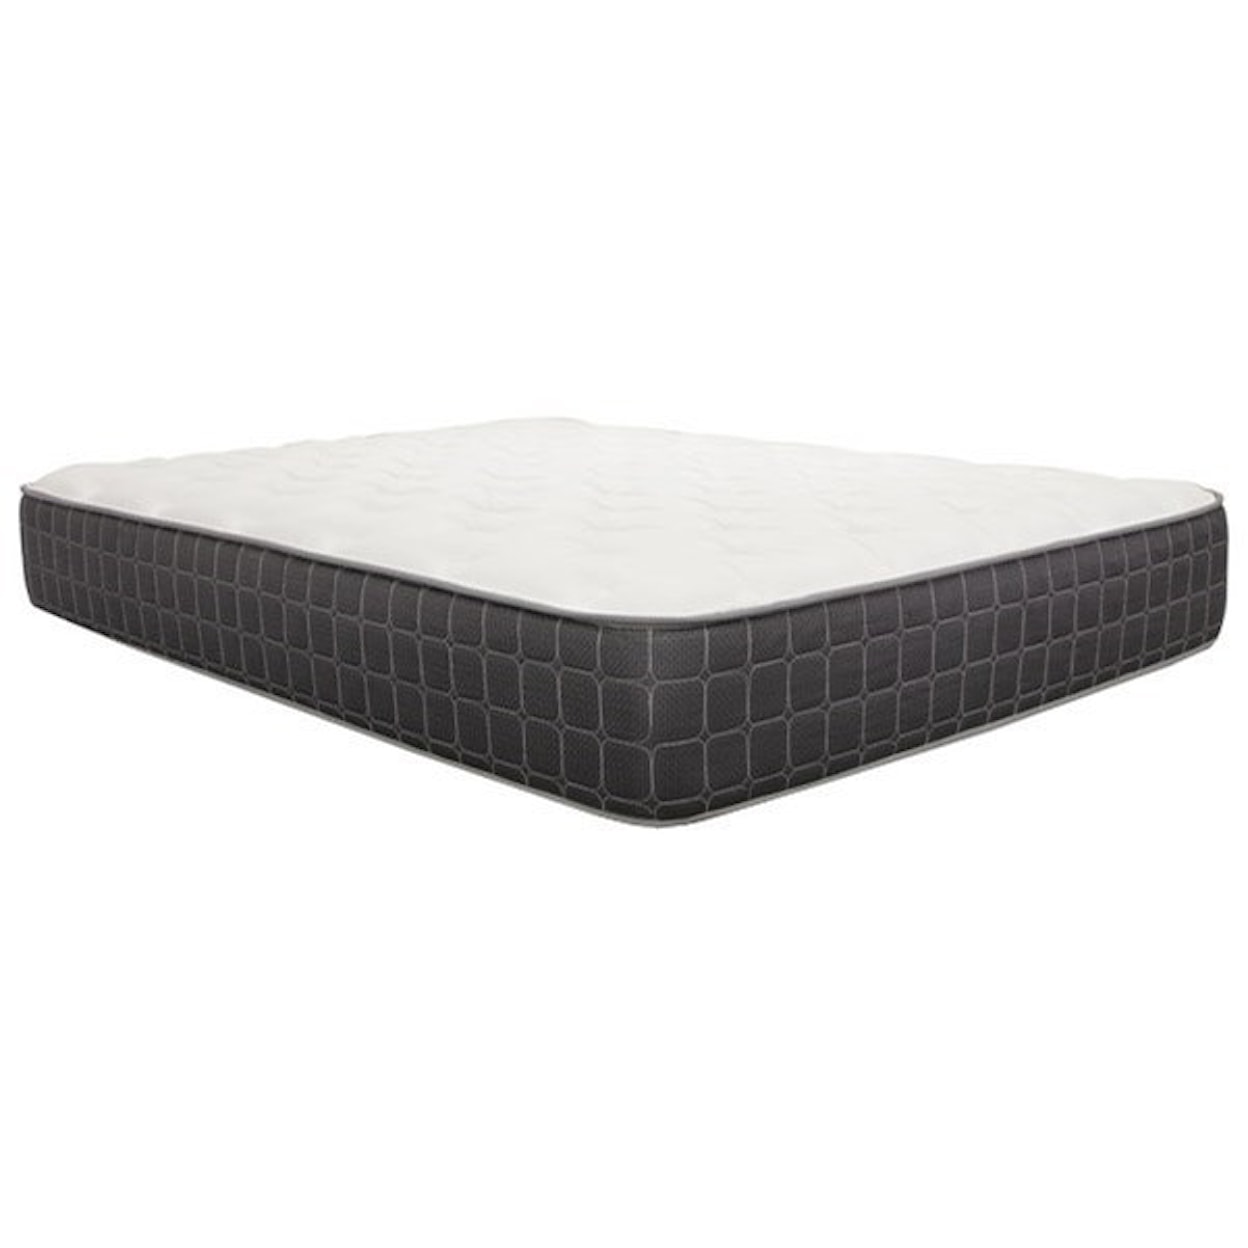 Corsicana Dilly Plush Queen Plush Pocketed Coil Mattress